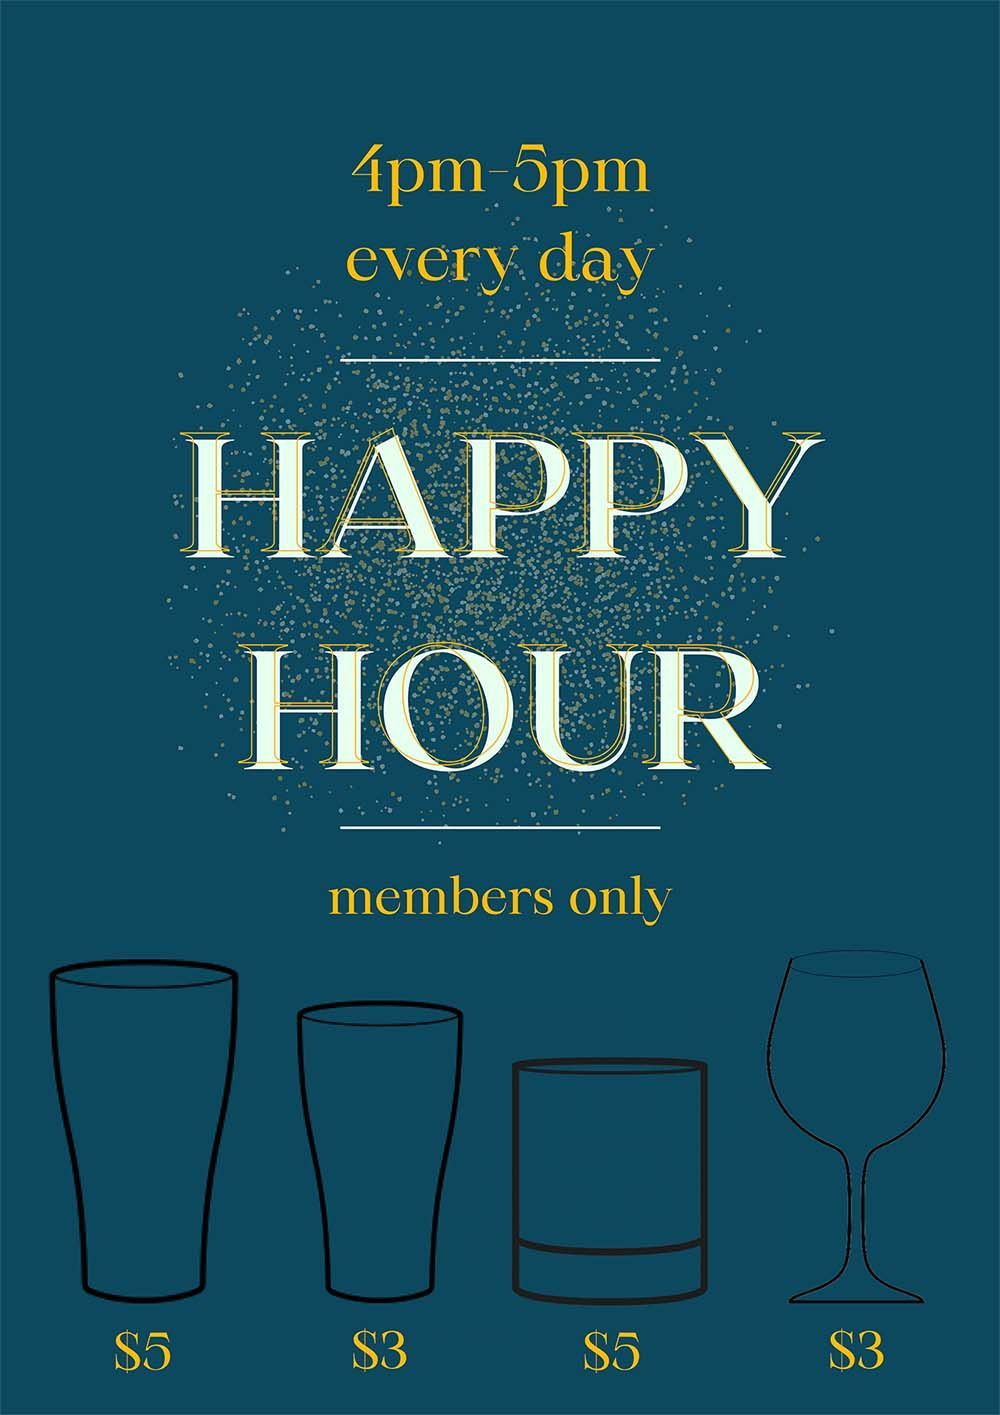 Happy Hour Every Day at Hoppers Crossing Sports Club